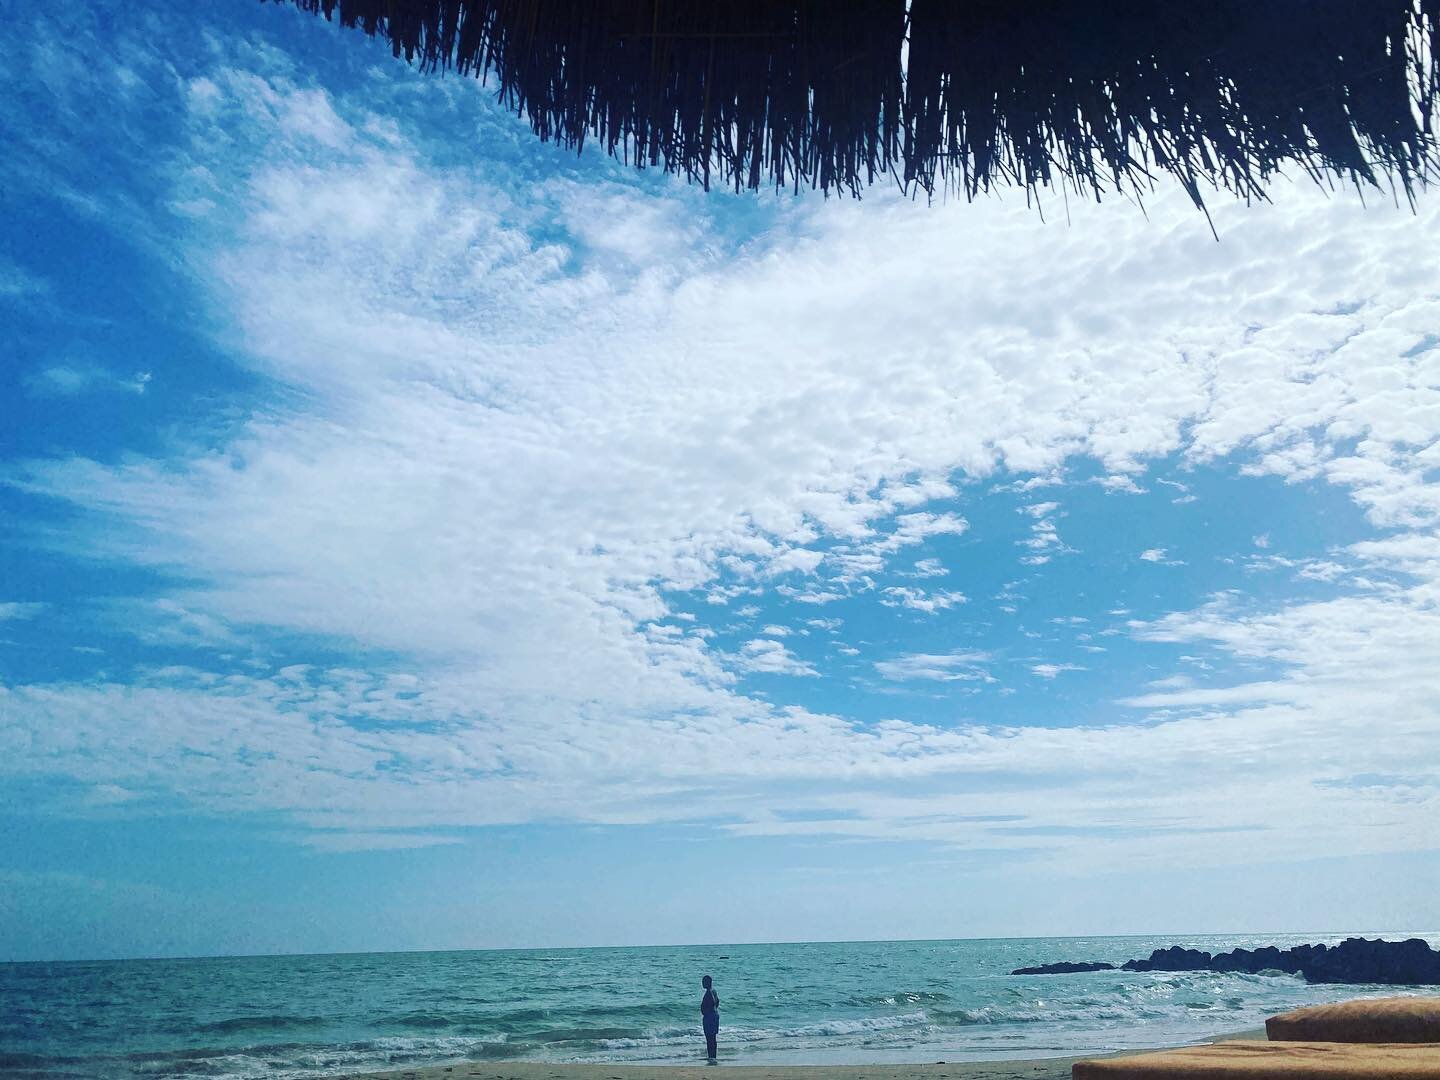 Your life is meant to be lived passionately on purpose, abundantly and unapologetically!

Inspirations from the beautiful sky and seas 🌊  of Senegal 🇸🇳!

#TheUtopiaExperience @utopiasgwretreats #globaltravel #abundancemindset #UtopiaLiving #spaand